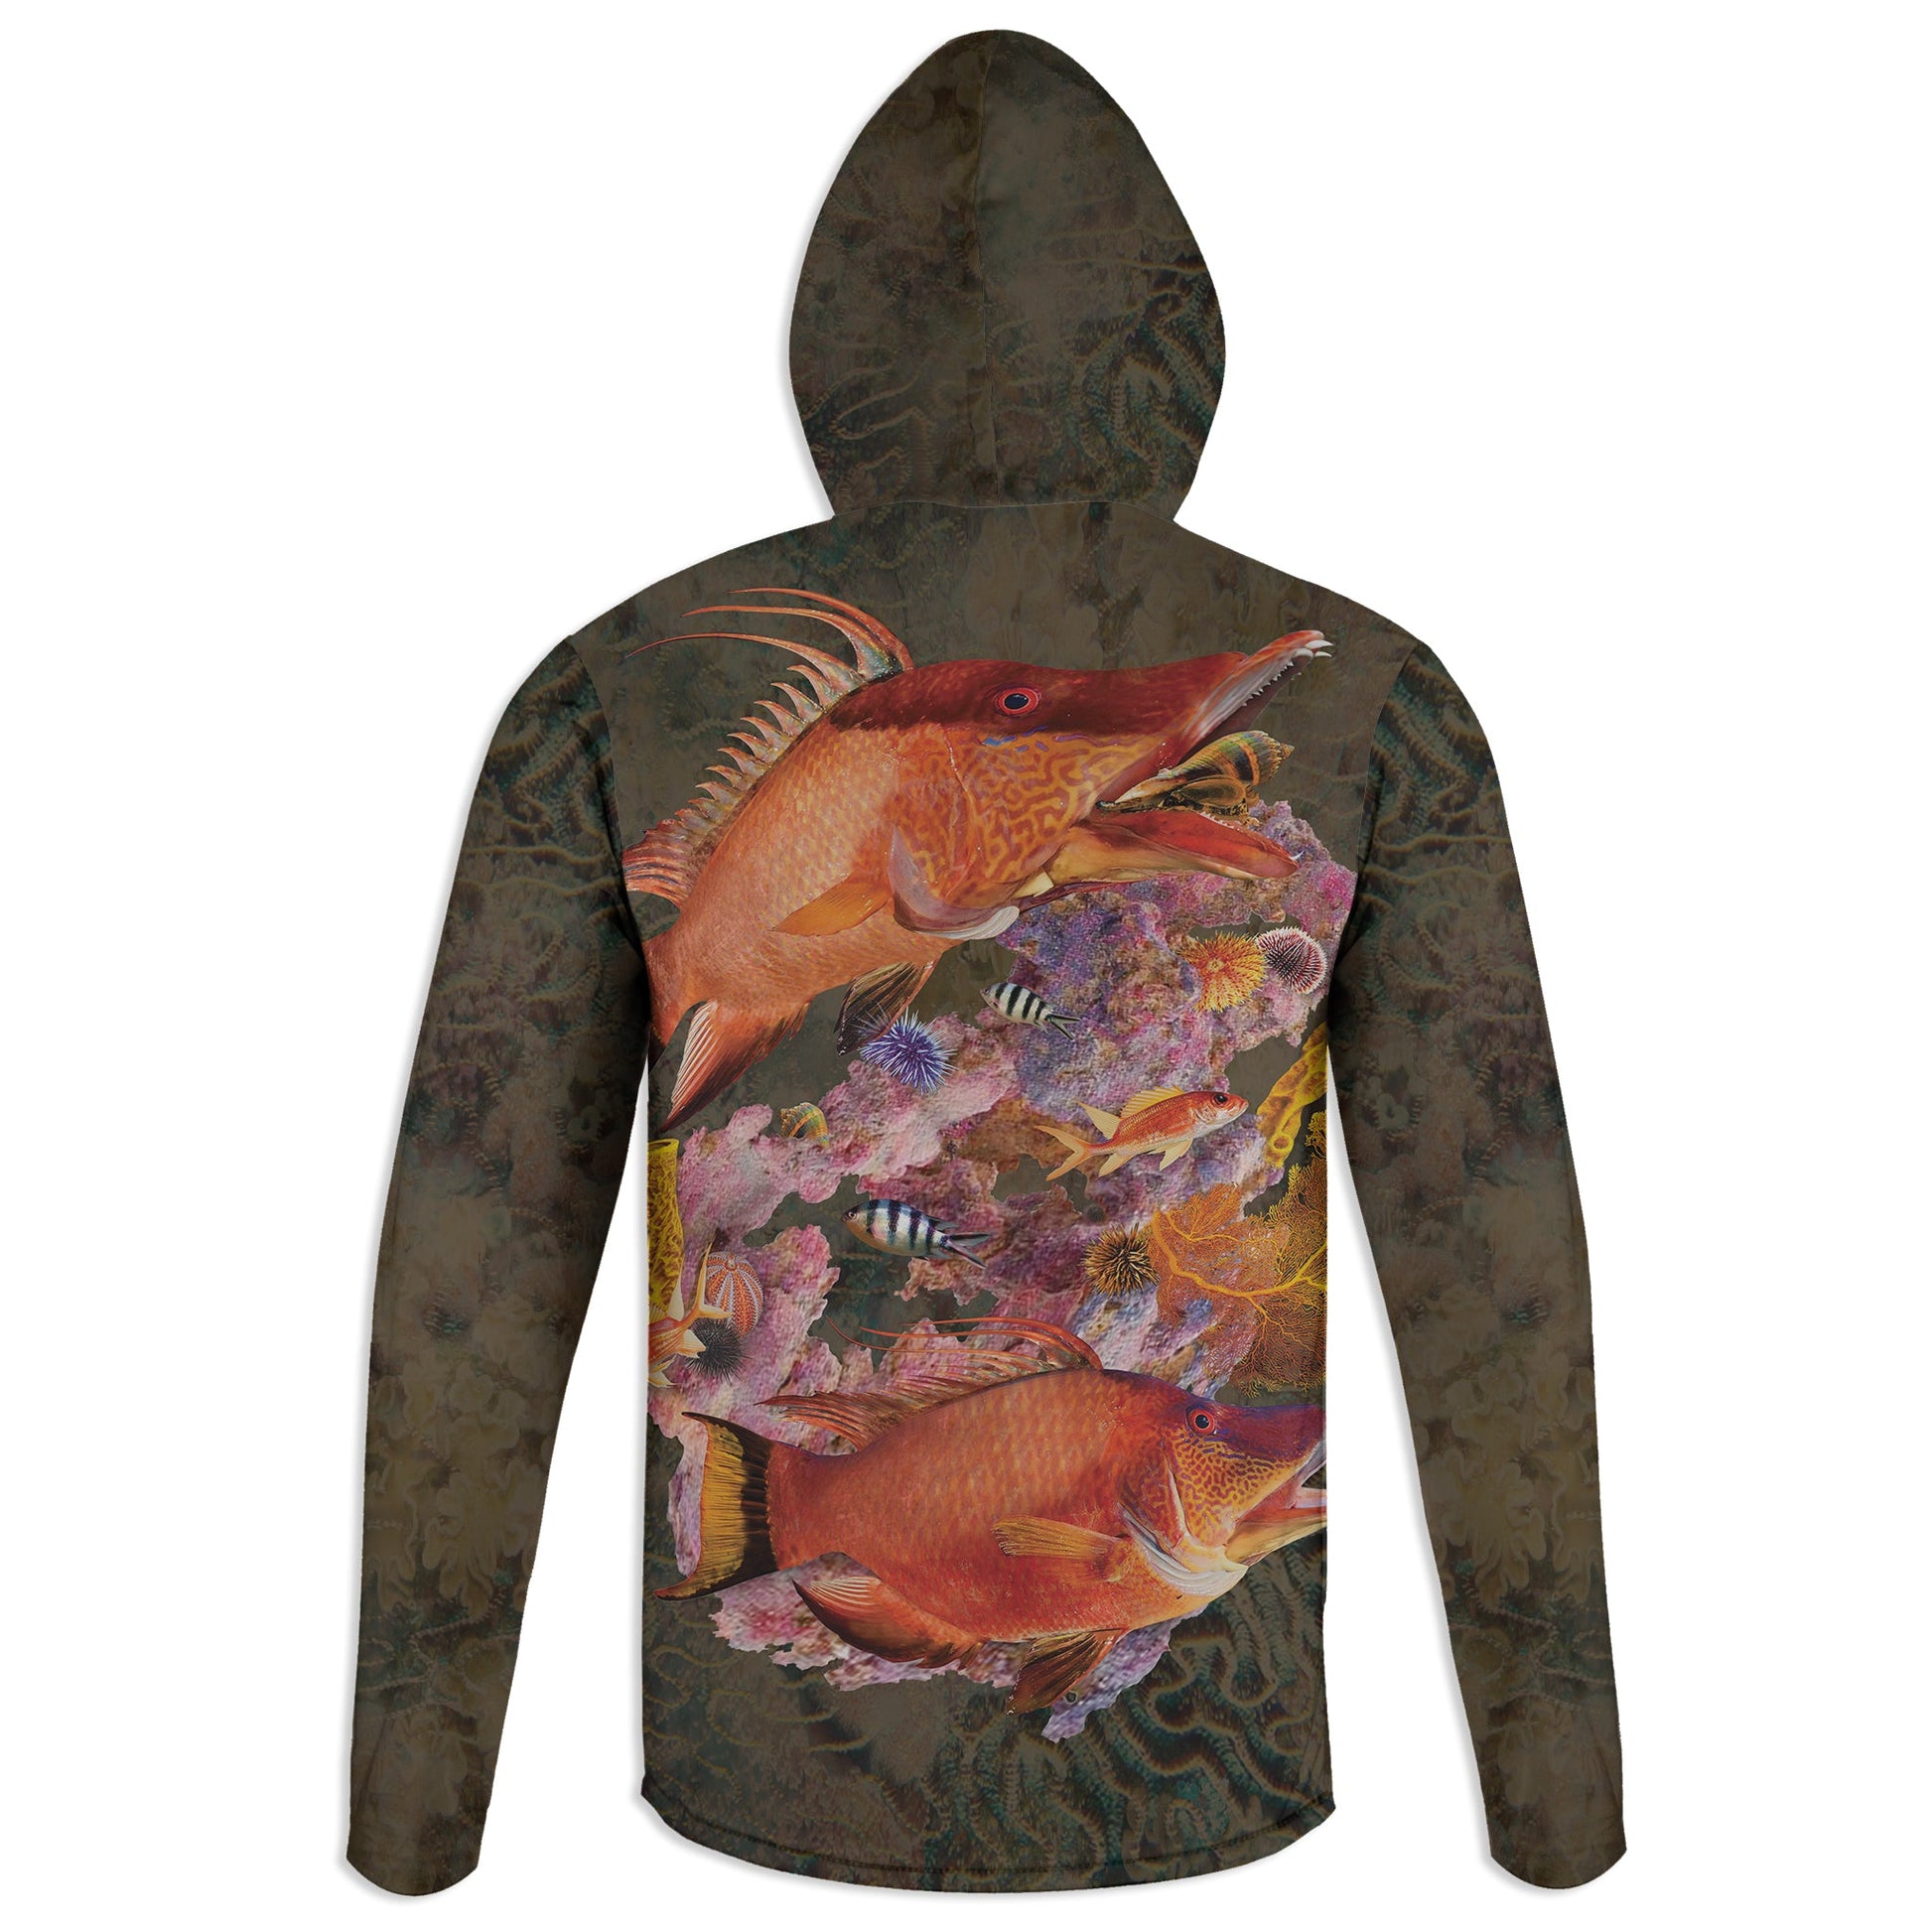 Hungry Hogfish Wetlands Performance Apparel